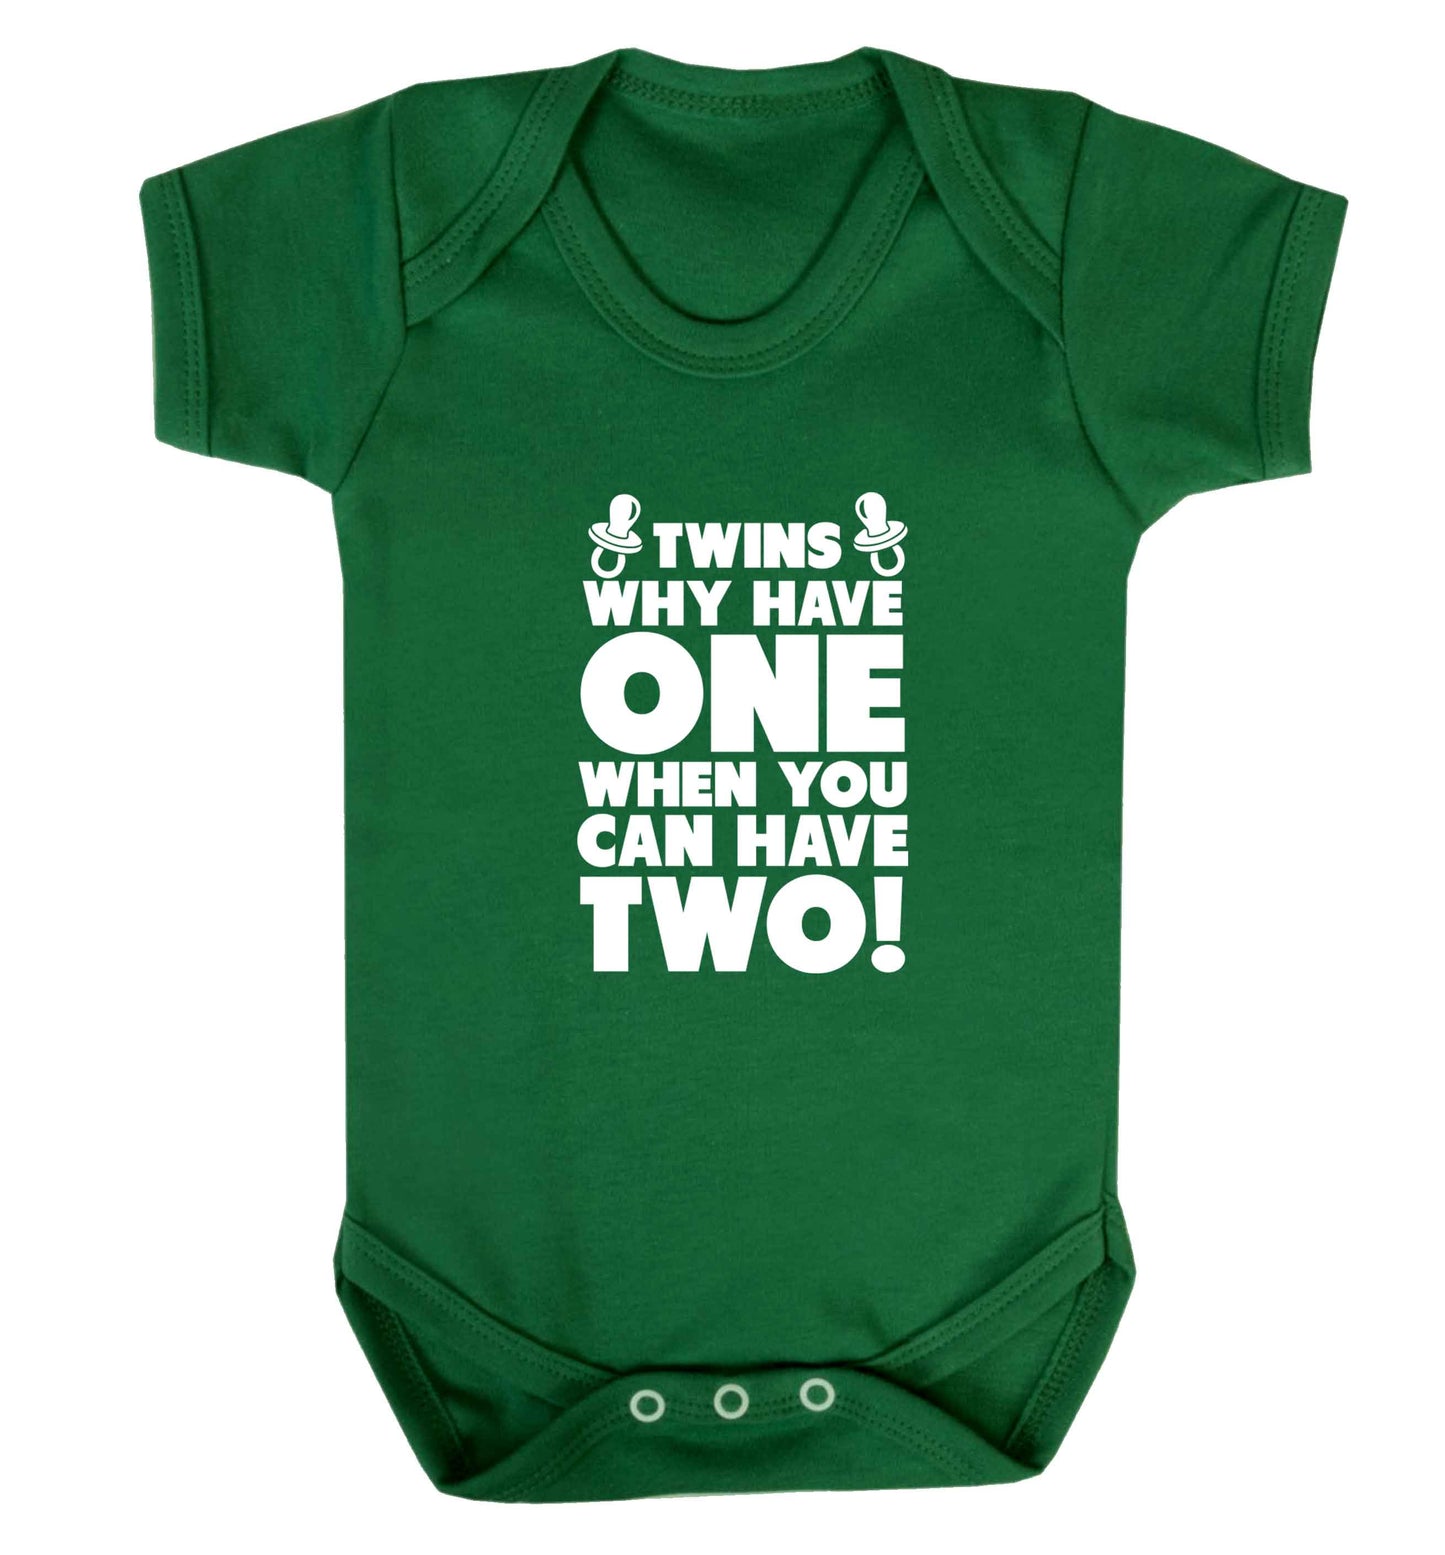 Twins why have one when you can have two baby vest green 18-24 months